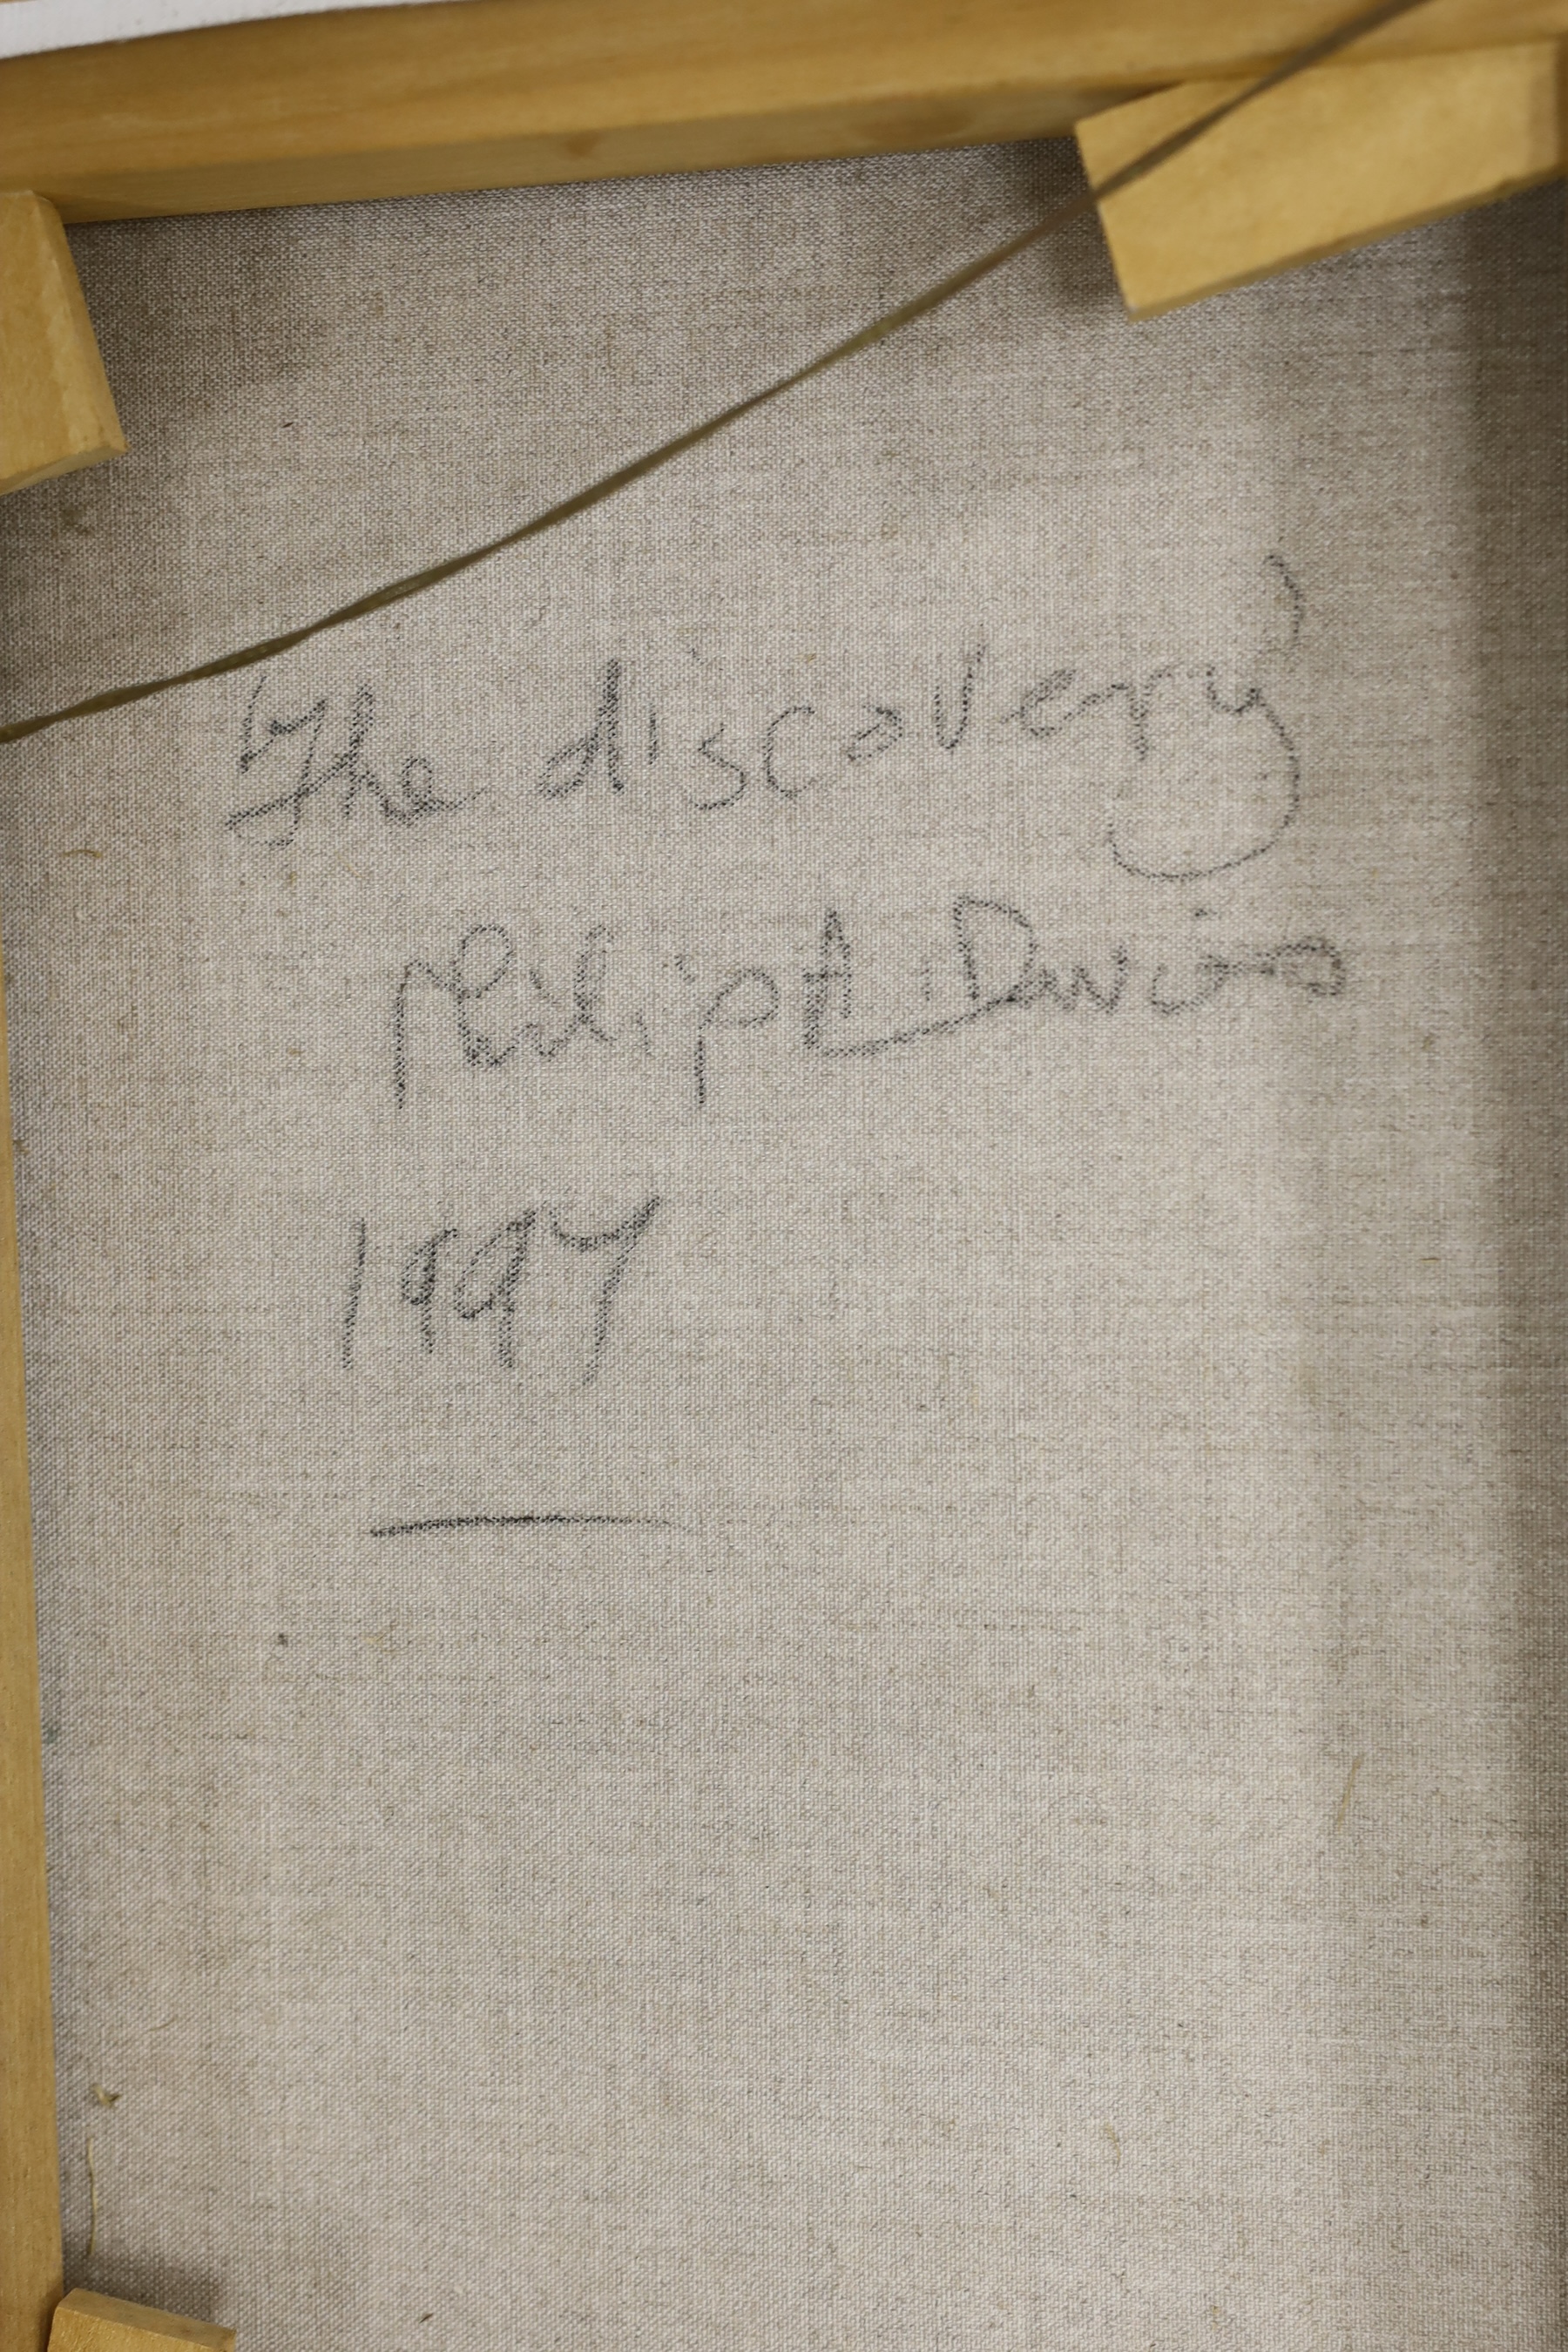 Philip Davies (1953-), oil on linen, 'The Discovery 1997', signed, Christopher Hull Gallery label verso, 42 x 58cm. Condition - fair